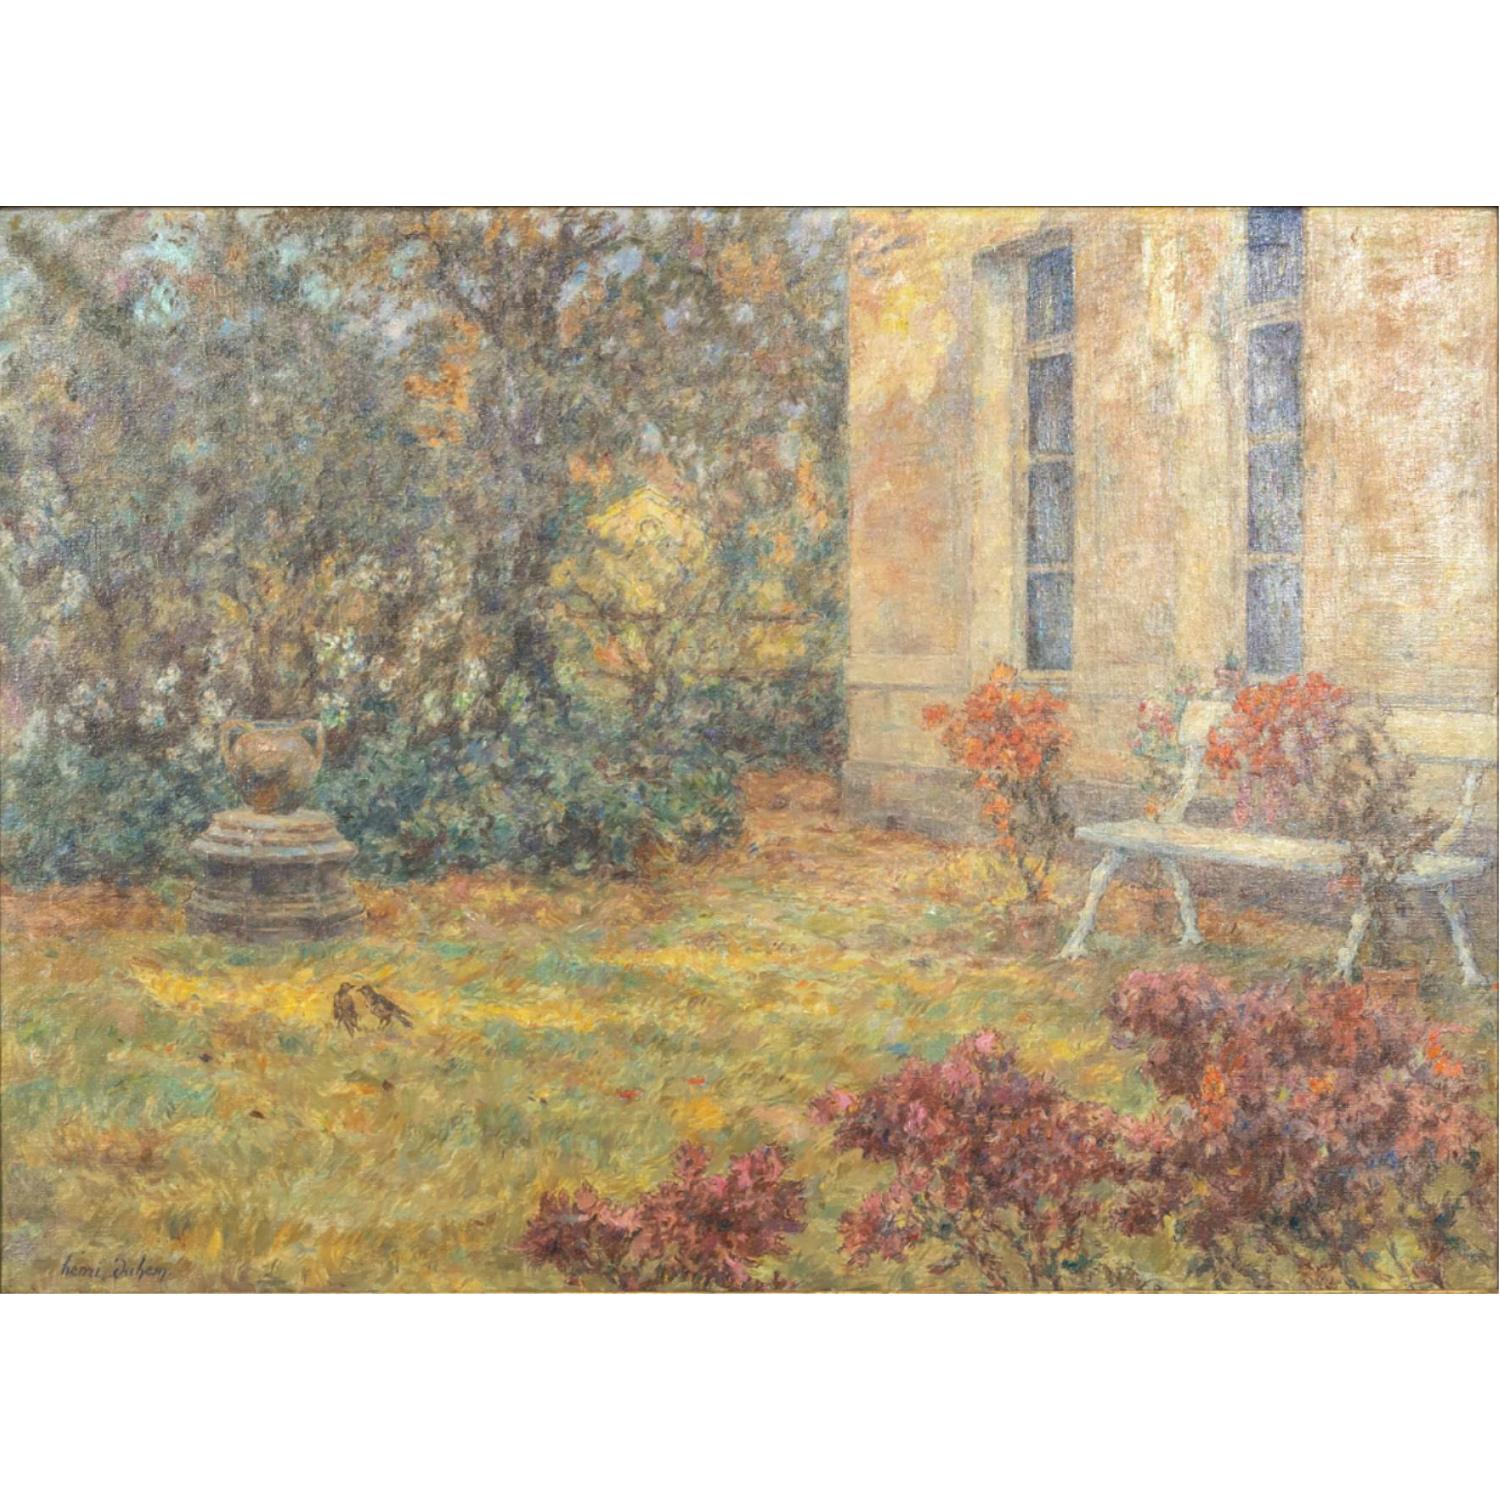 A wonderful large signed and dated framed antique French impressionist oil on canvas by French artist Henri Duhem, circa early 1900s. This serene garden landscape depicts a view of the artist's home and garden in late summer with a garden bench,